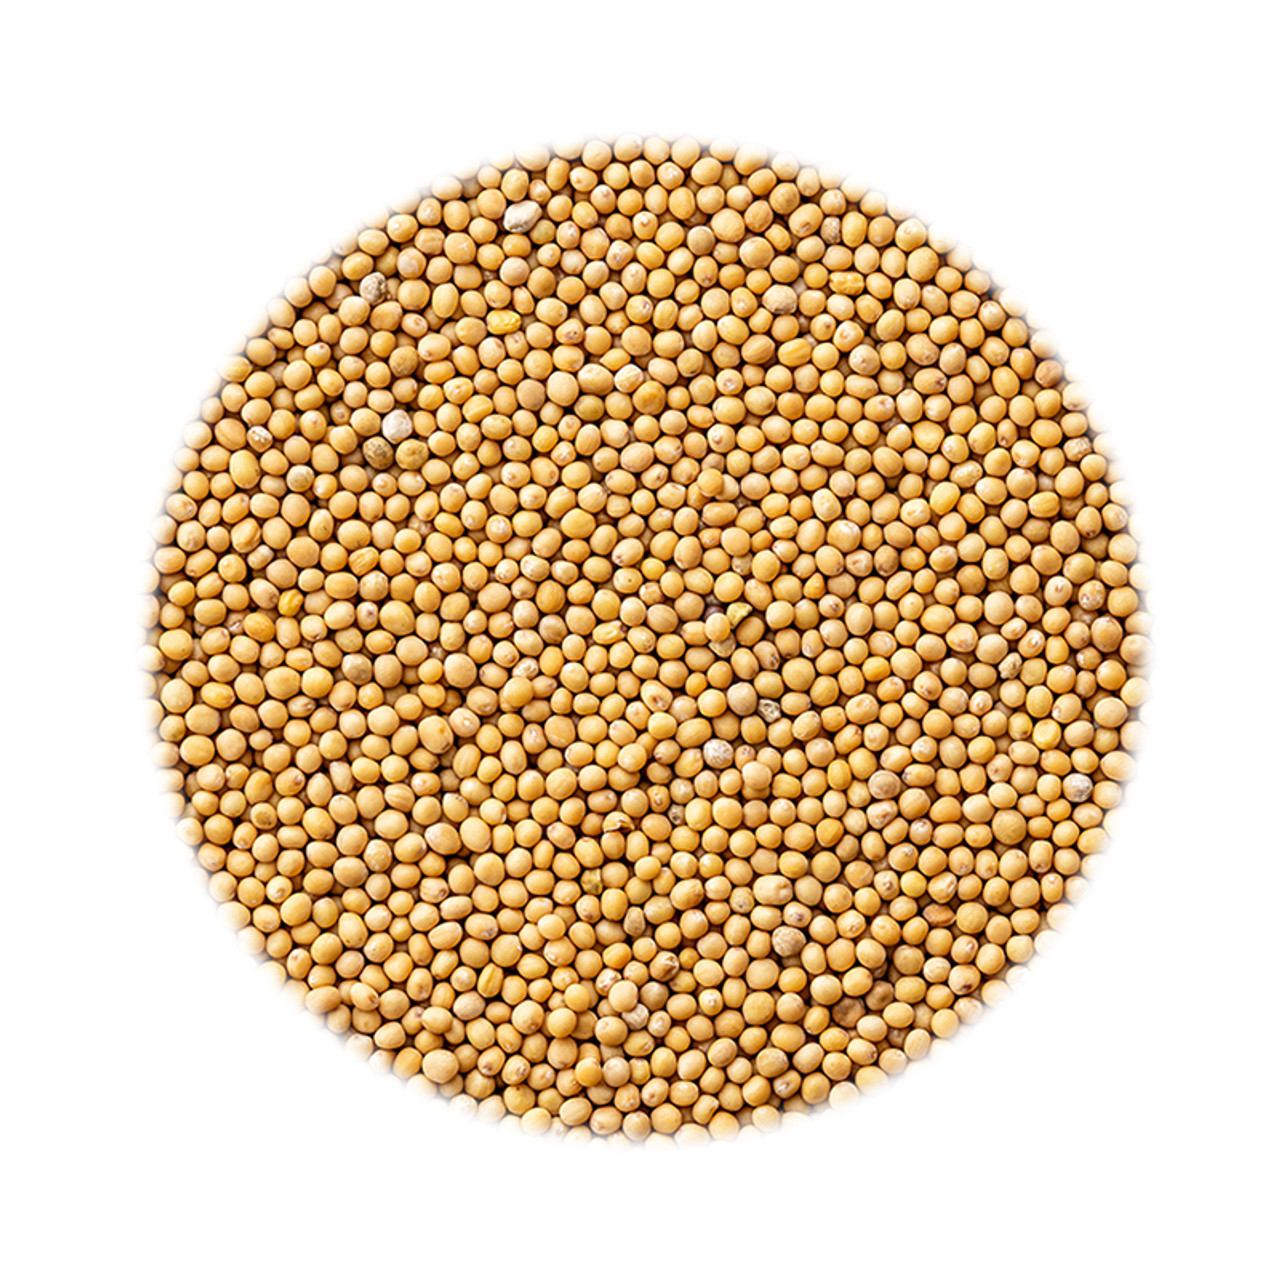 FOX’S SPICES YELLOW MUSTARD SEEDS 850G